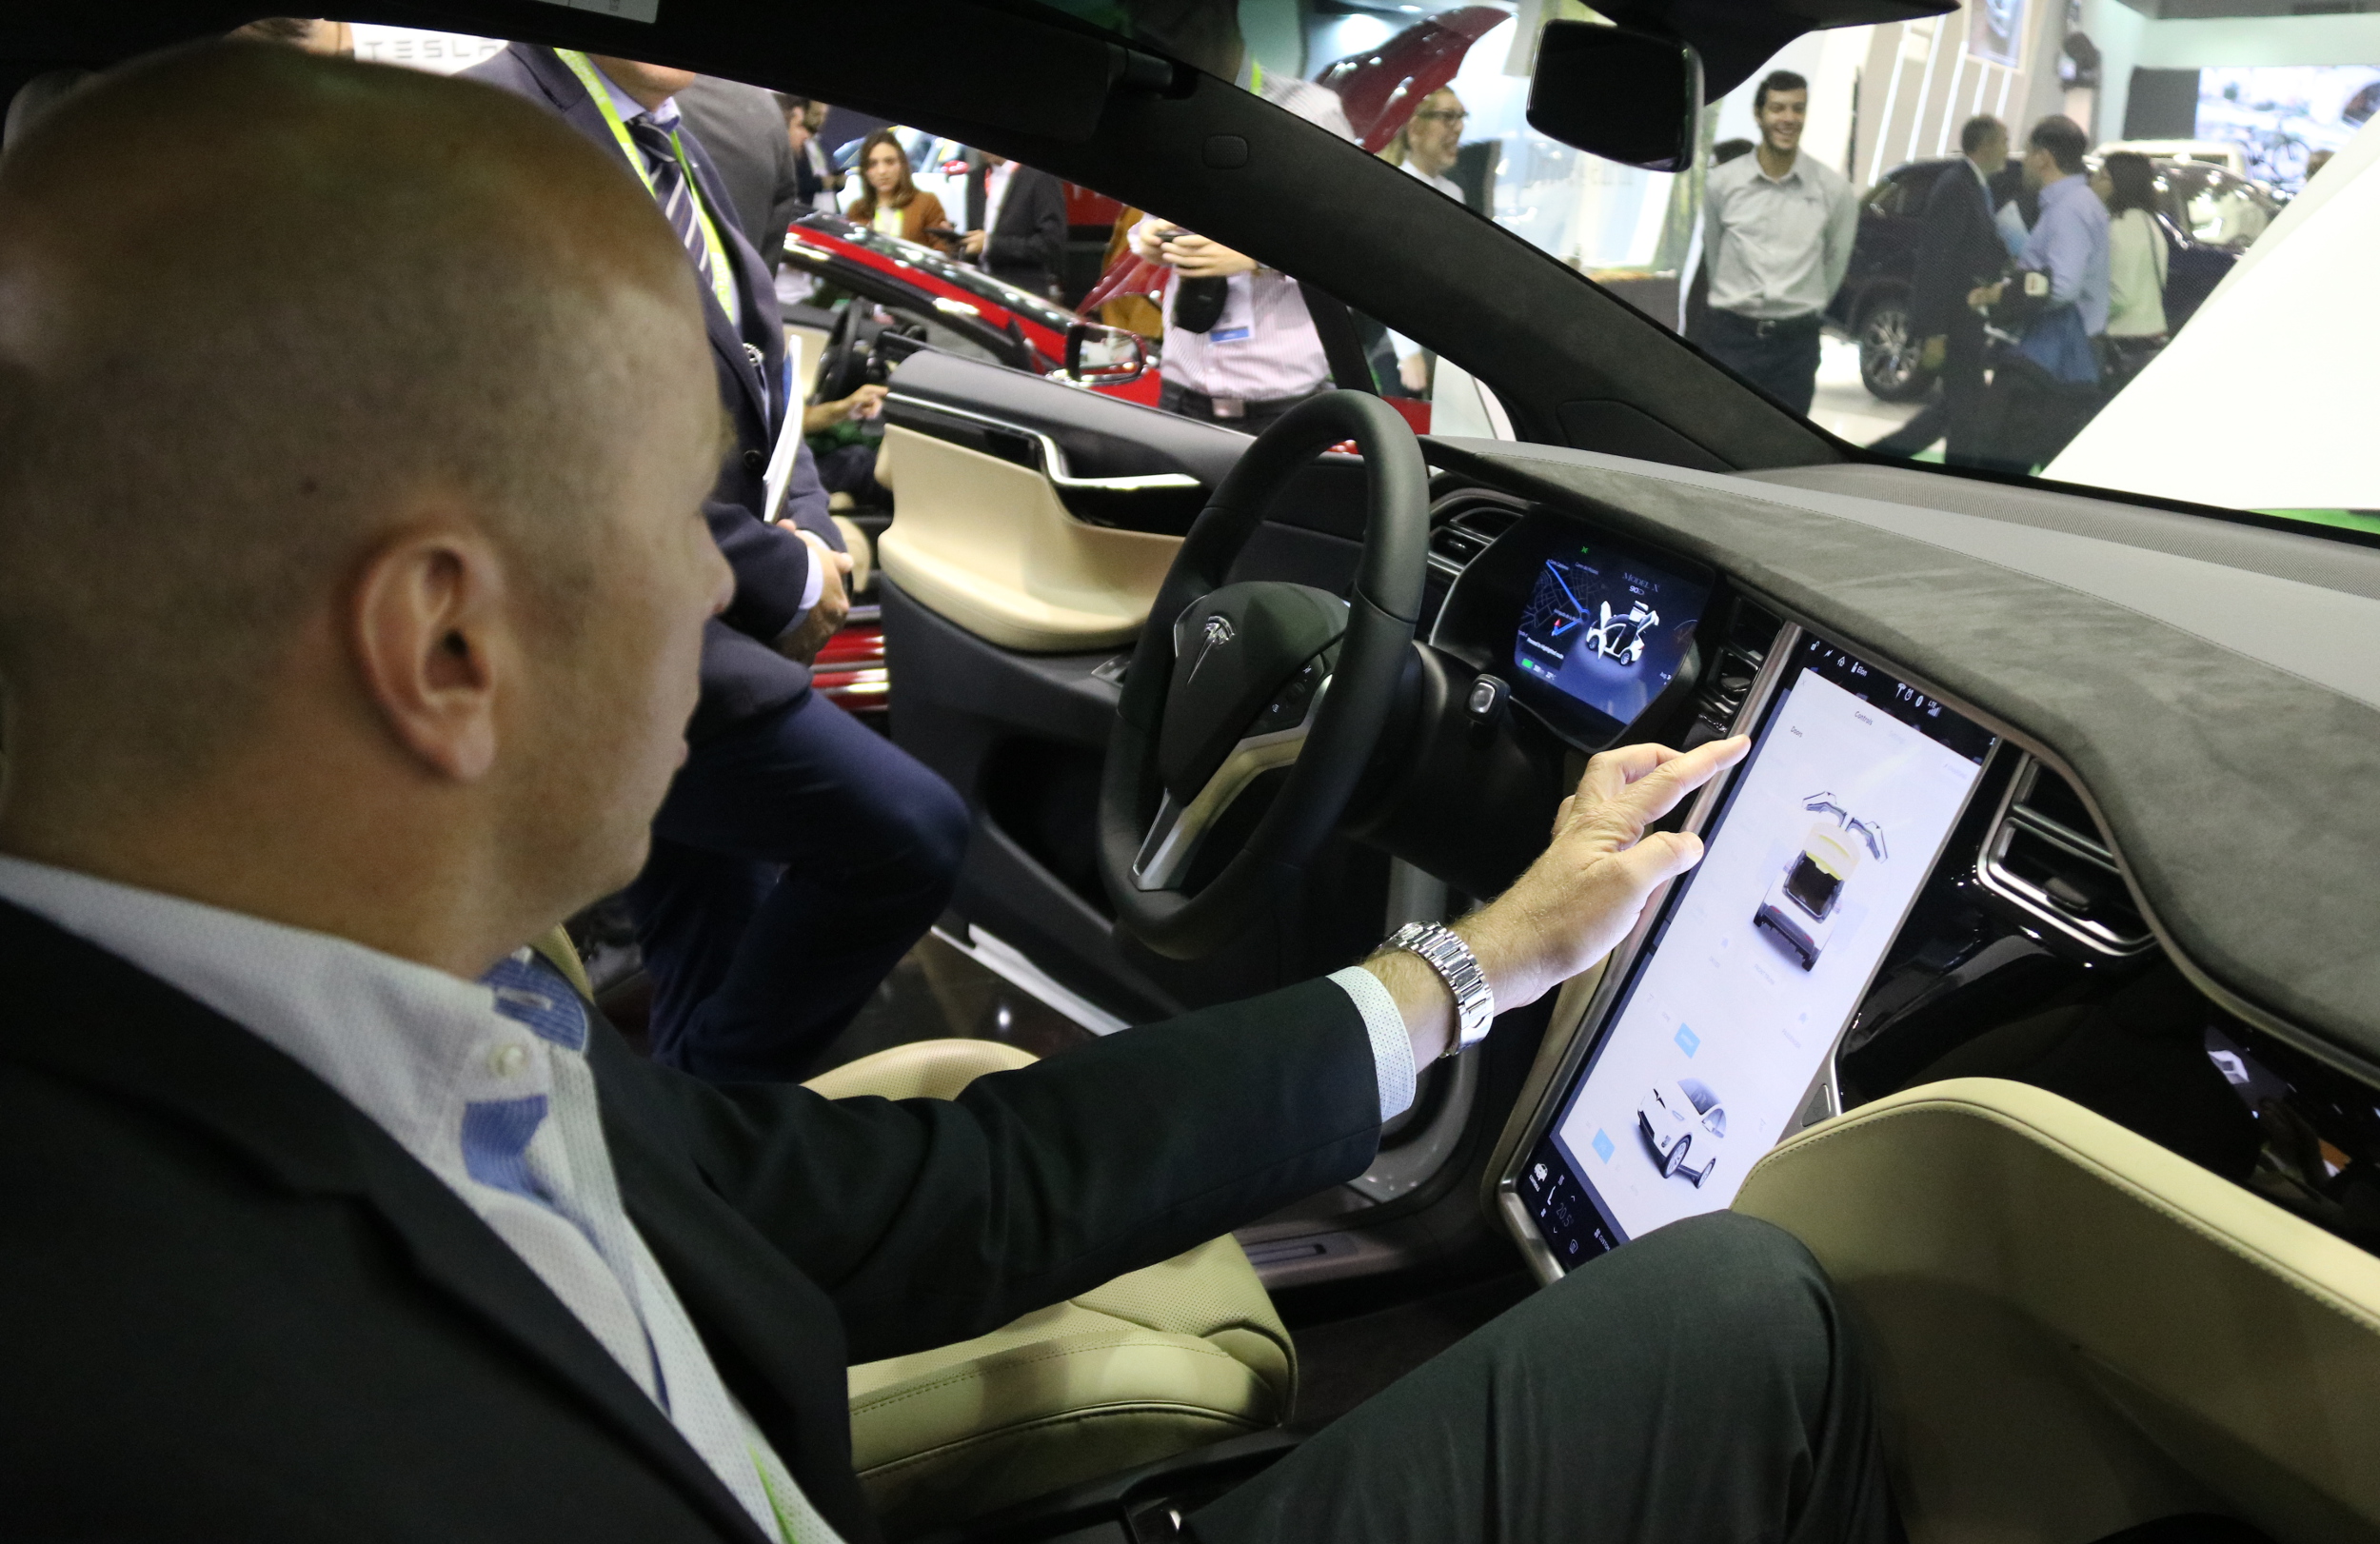 Visitor at 'Automobile Barcelona' testing the connectivity of a Tesla's prototype (by ACN)